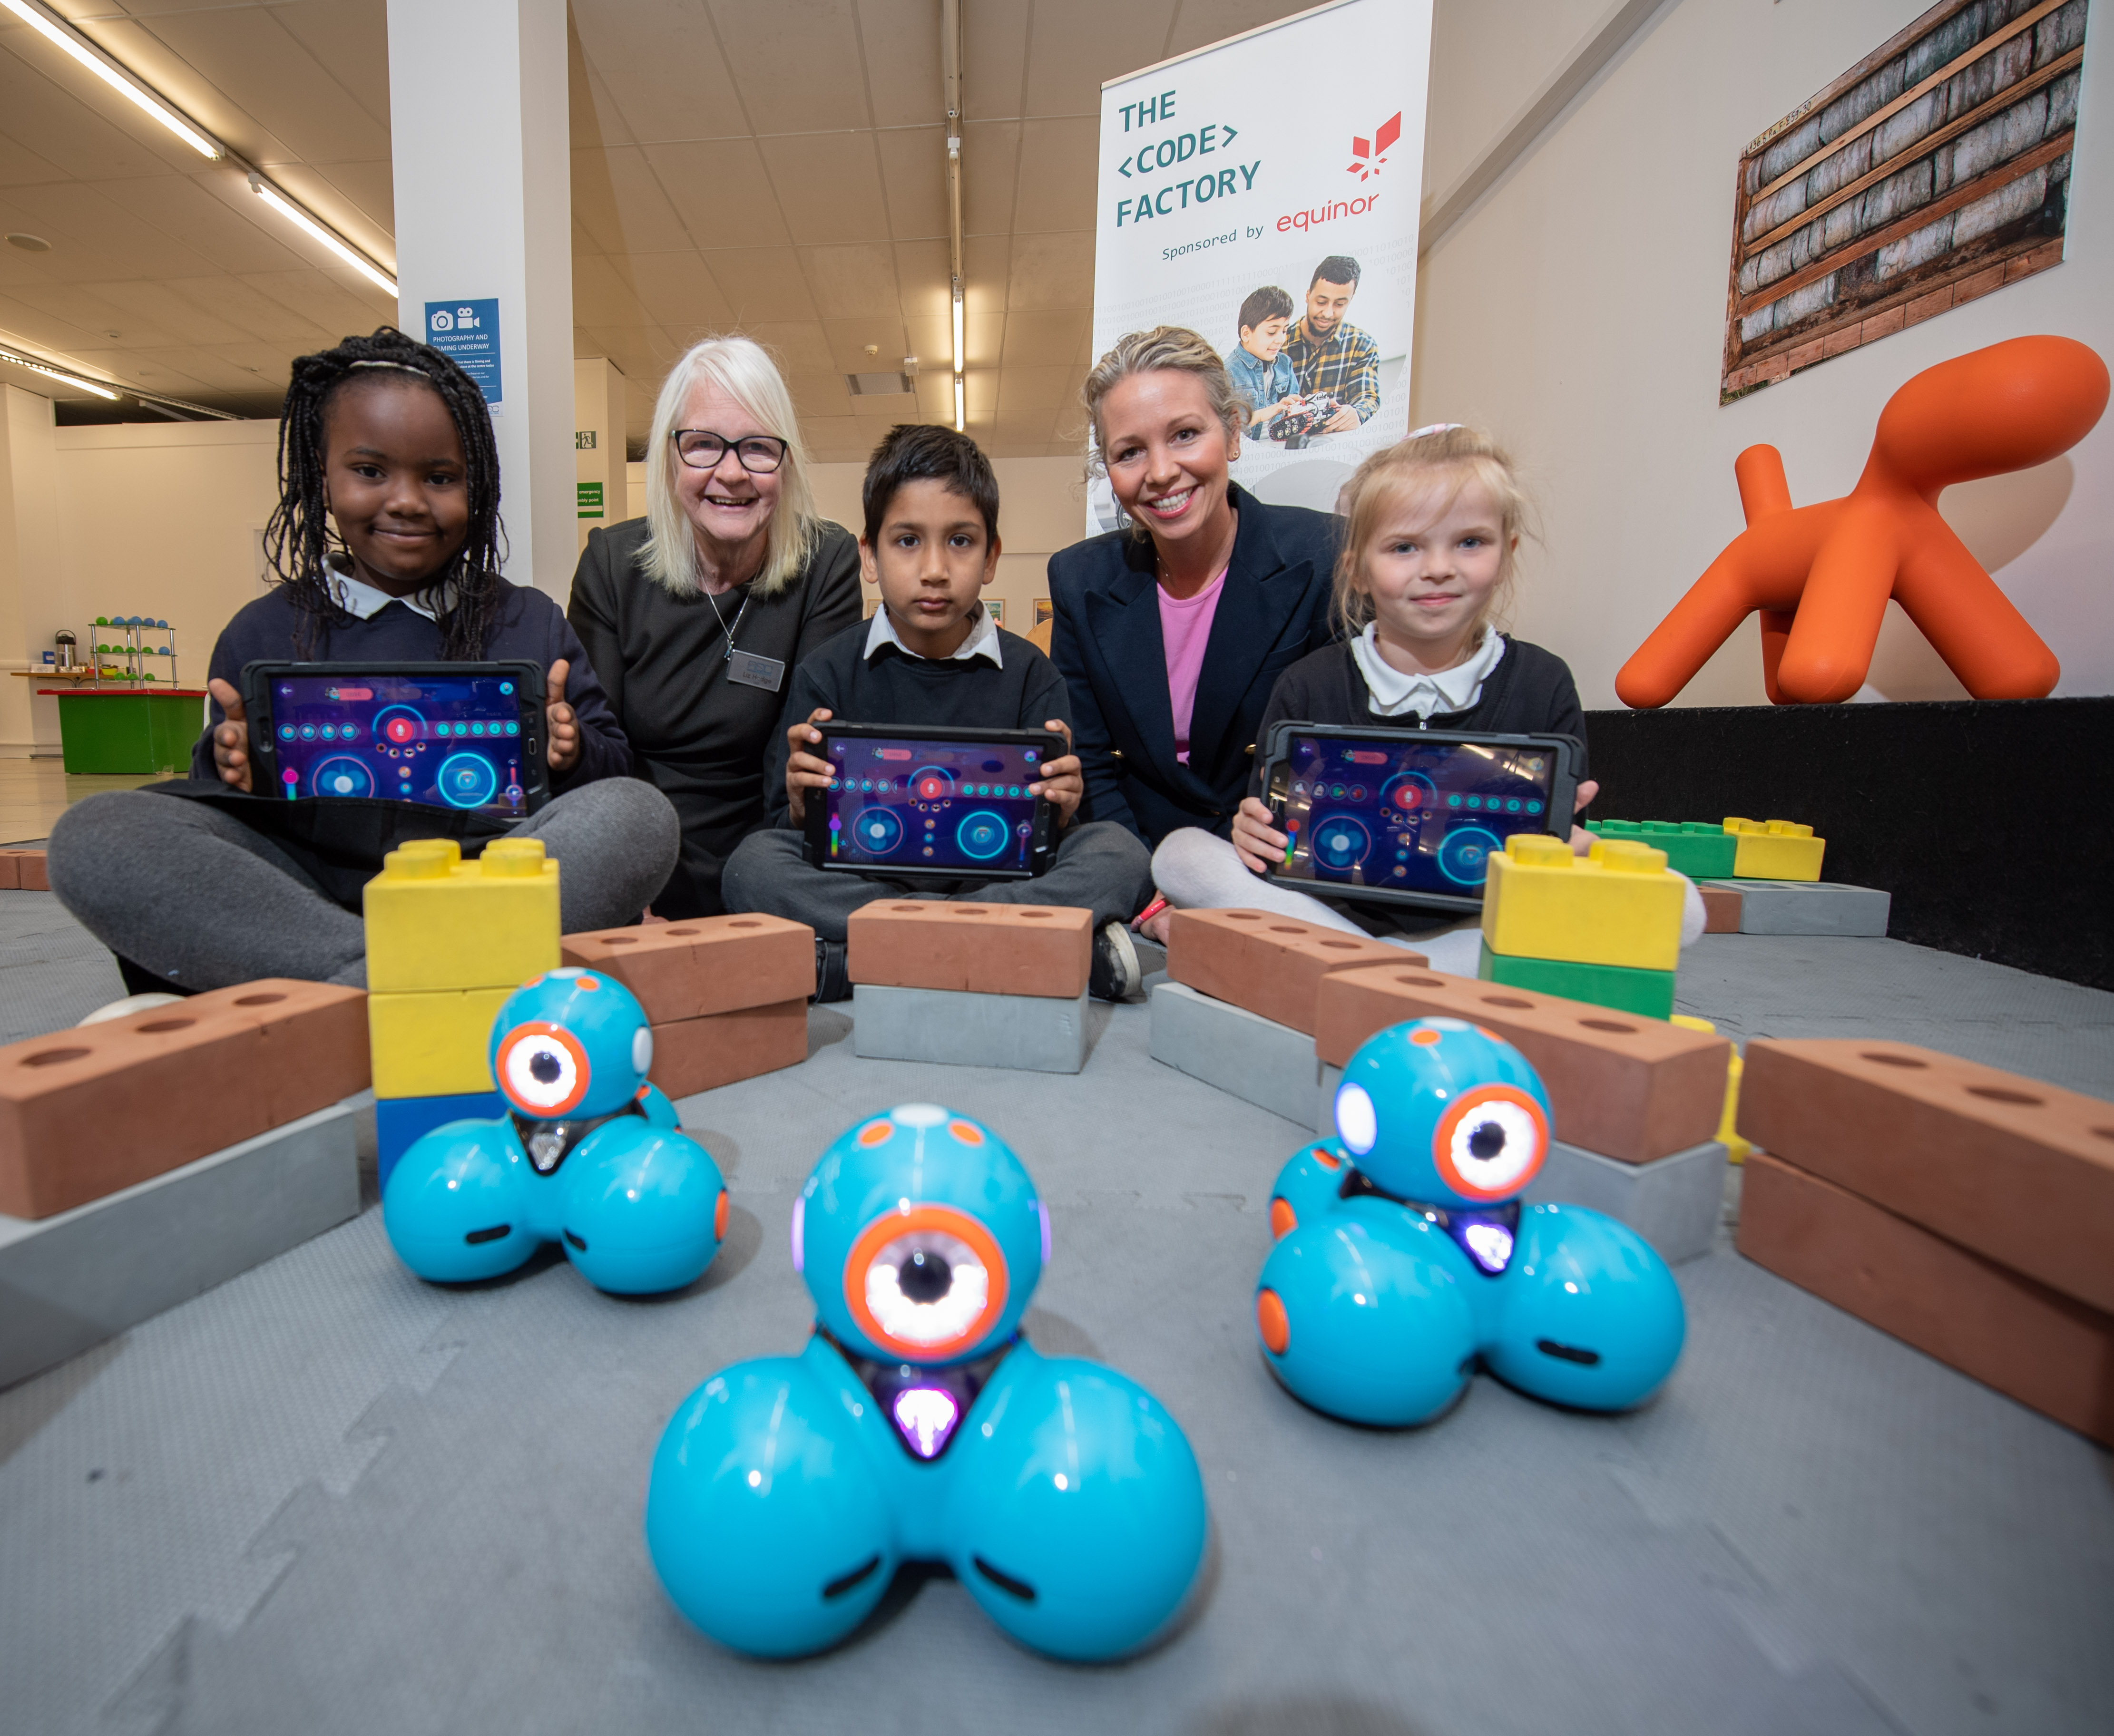 Balmoral, Ballater,  , Scotland, Wednesday, 29 May  2019 
 
Equinor has become the first platinum sponsor of Aberdeen Science Centre, as part of a three-year digital futures partnership to support STEM education and the digital transformation.



Picture by Abermedia / Michal Wachucik